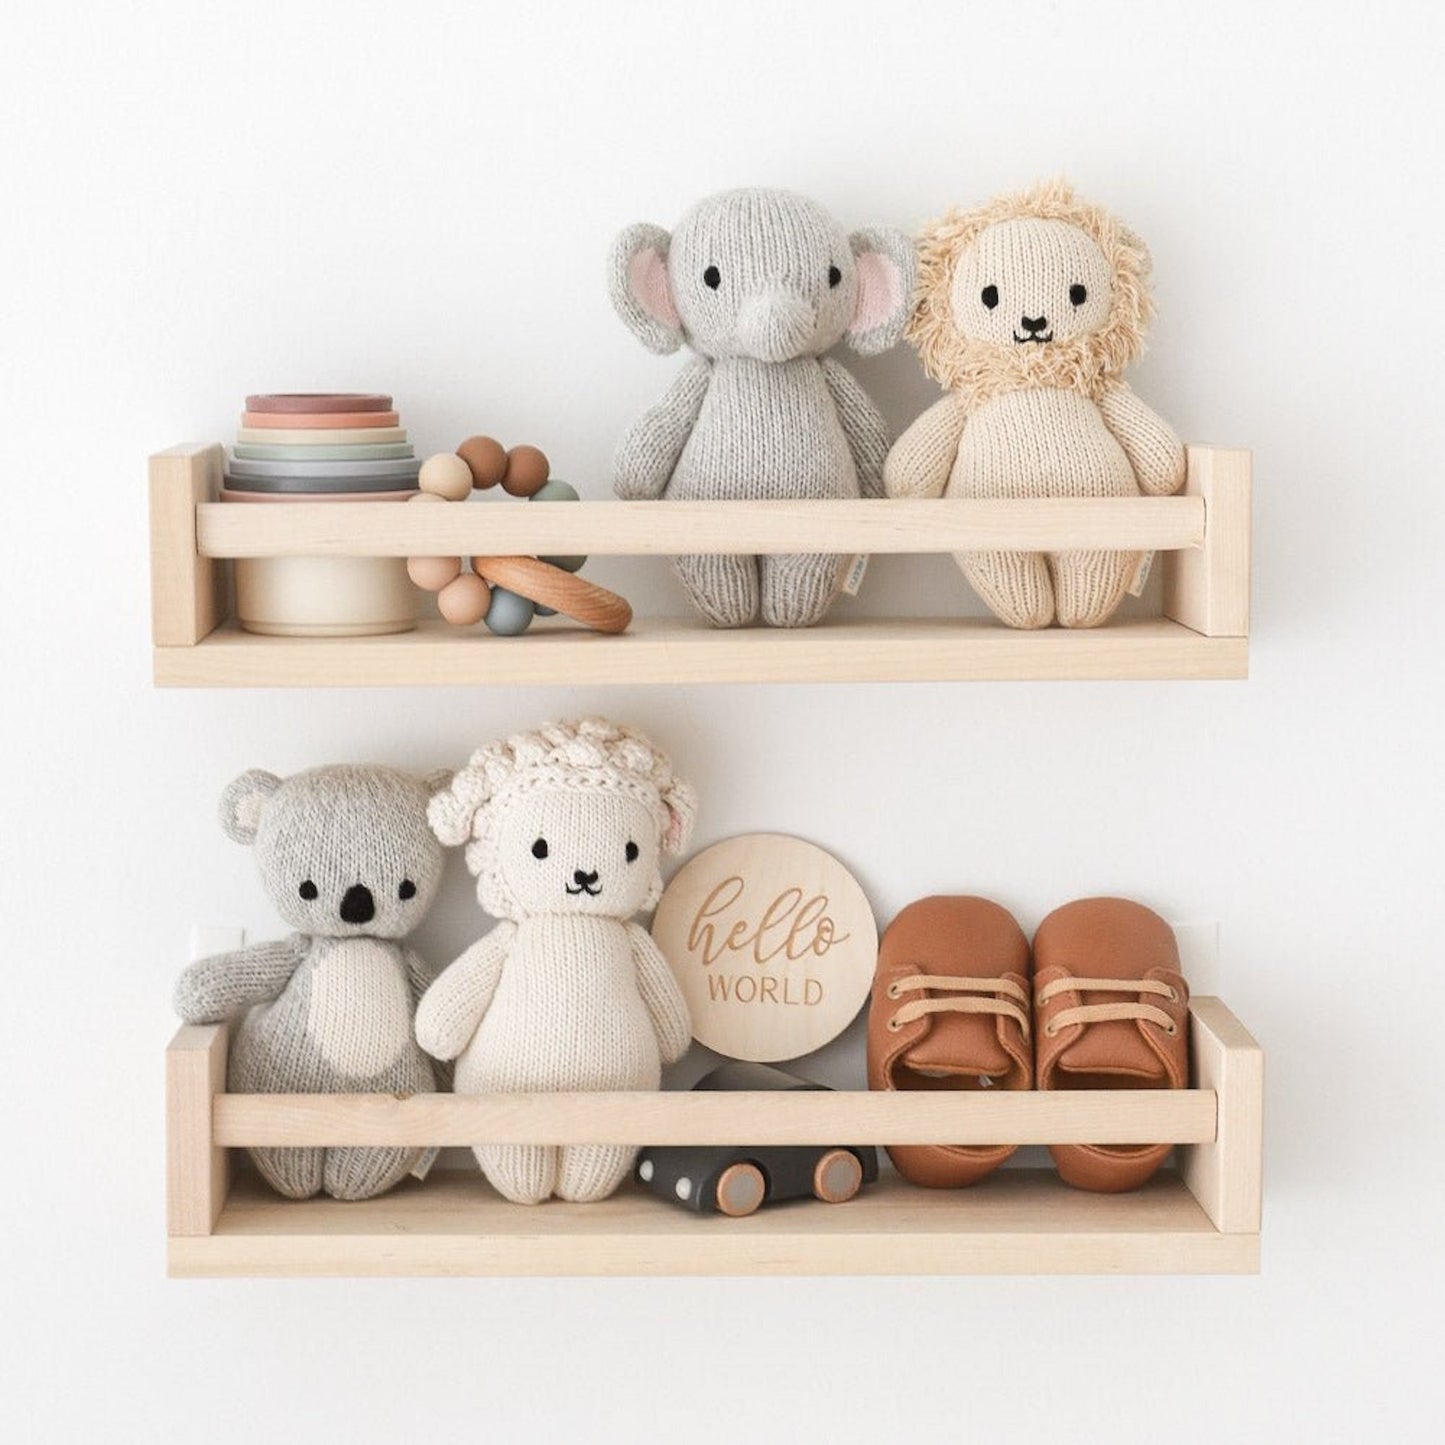 Two bookshelves adorned with adorable hand-knit dolls and a variety of engaging baby toys.